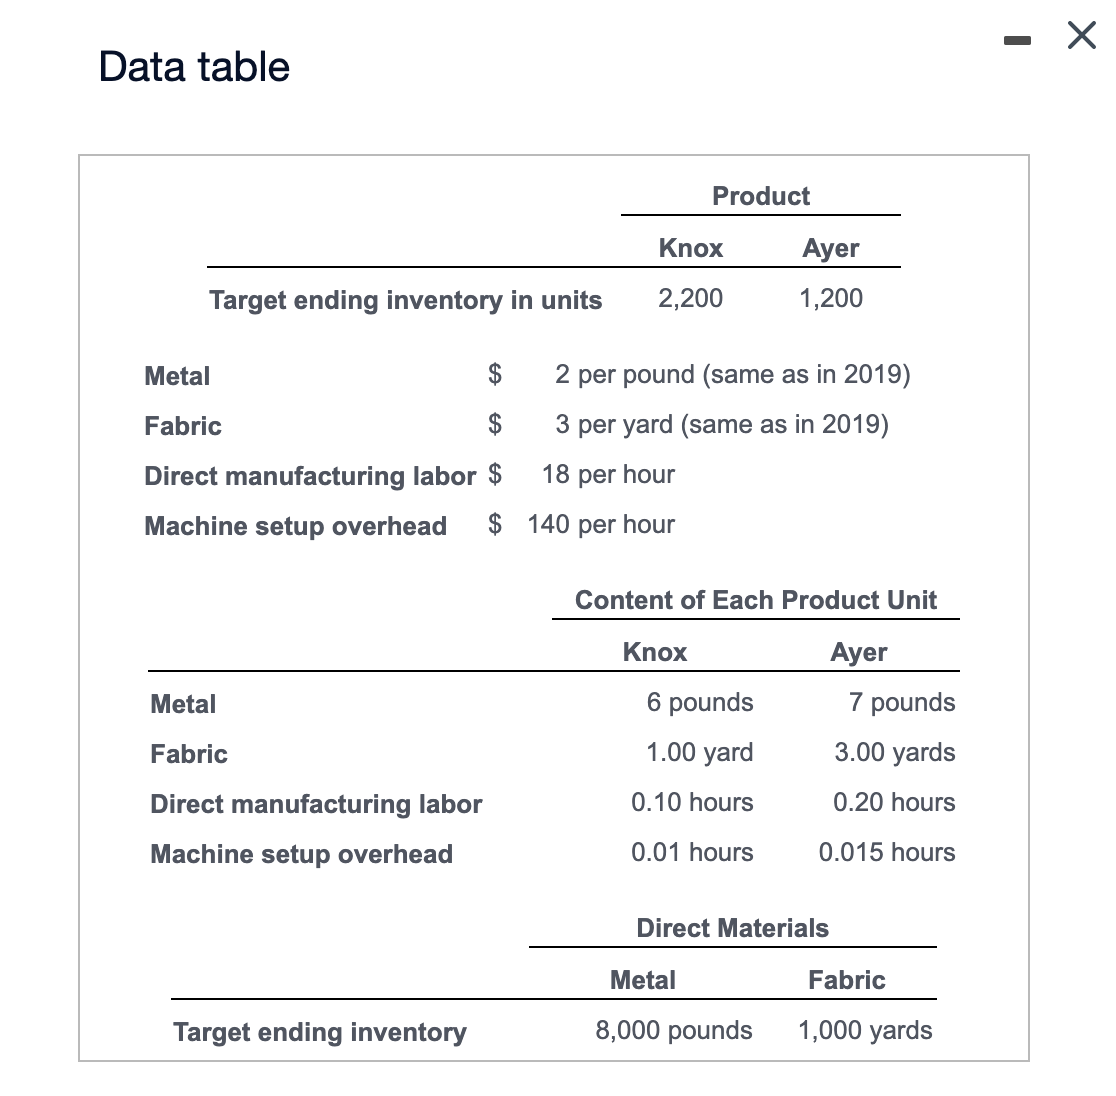 Data table
Target ending inventory in units
Metal
$
Fabric
$
Direct manufacturing labor $
Machine setup overhead $
Metal
Fabric
Direct manufacturing labor
Machine setup overhead
Target ending inventory
Knox
2,200
Product
18 per hour
140 per hour
2 per pound (same as in 2019)
3
per yard (same as in 2019)
Knox
Content of Each Product Unit
Ayer
Ayer
1,200
6 pounds
1.00 yard
0.10 hours
0.01 hours
Metal
8,000 pounds
7 pounds
3.00 yards
0.20 hours
0.015 hours
Direct Materials
Fabric
1,000 yards
|
X